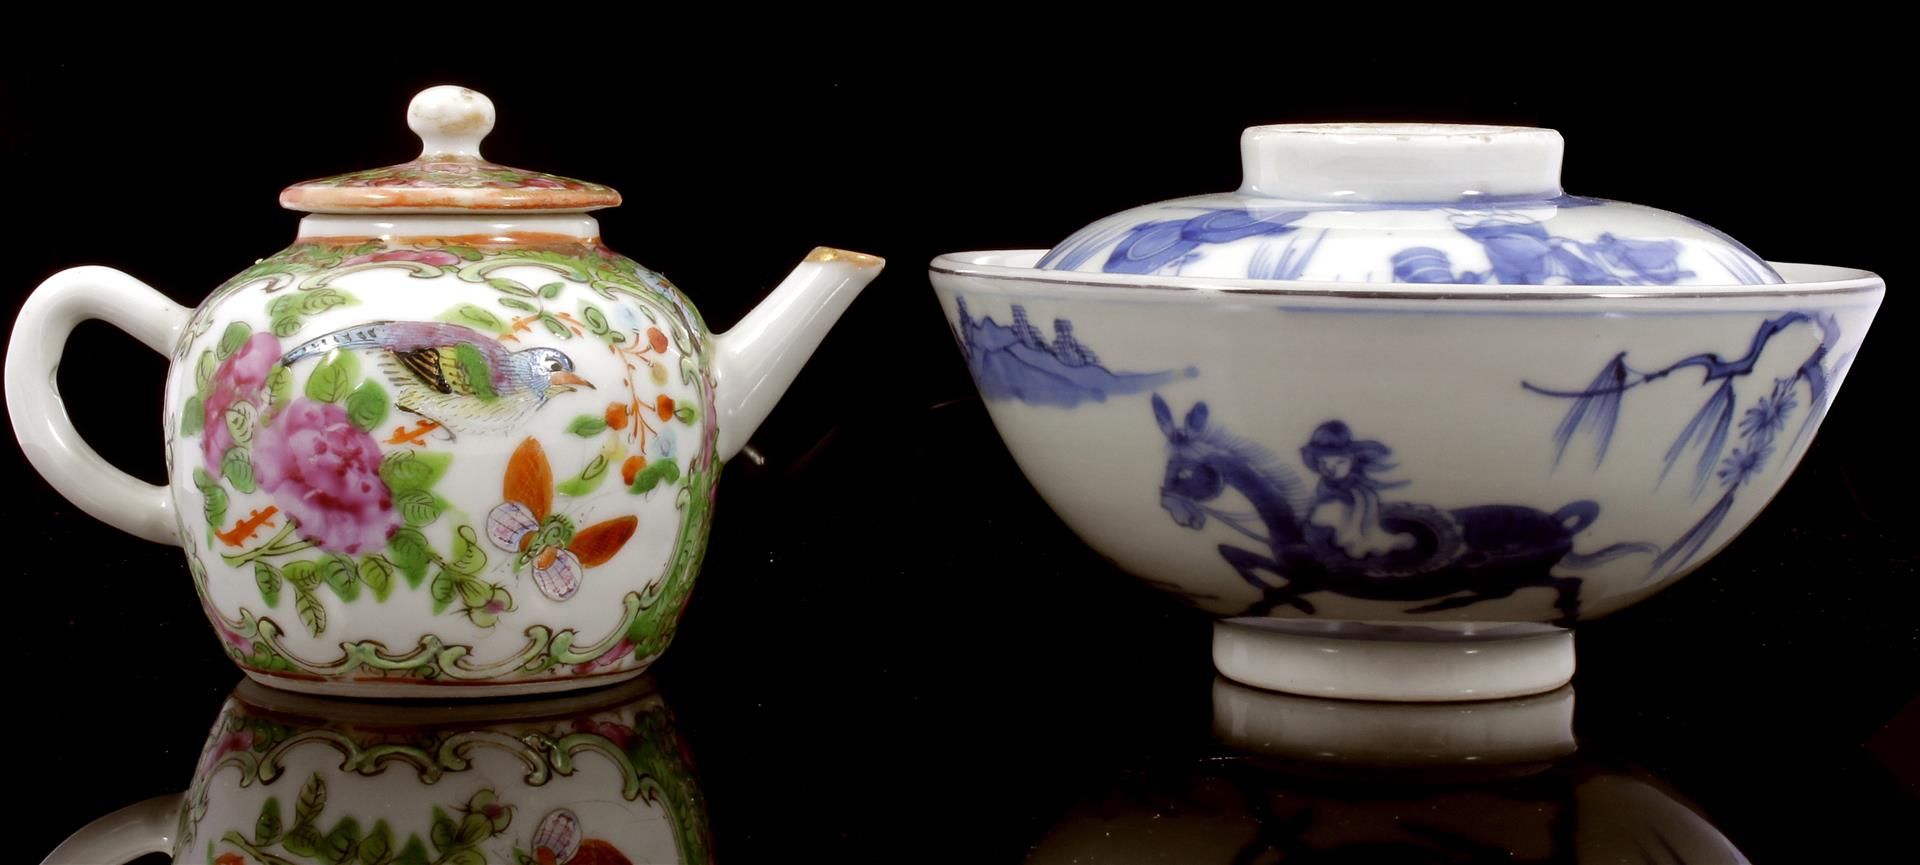 Chinese porcelain & nbsp; teapot with polychrome decoration of figures, bird and butterflies, 20th